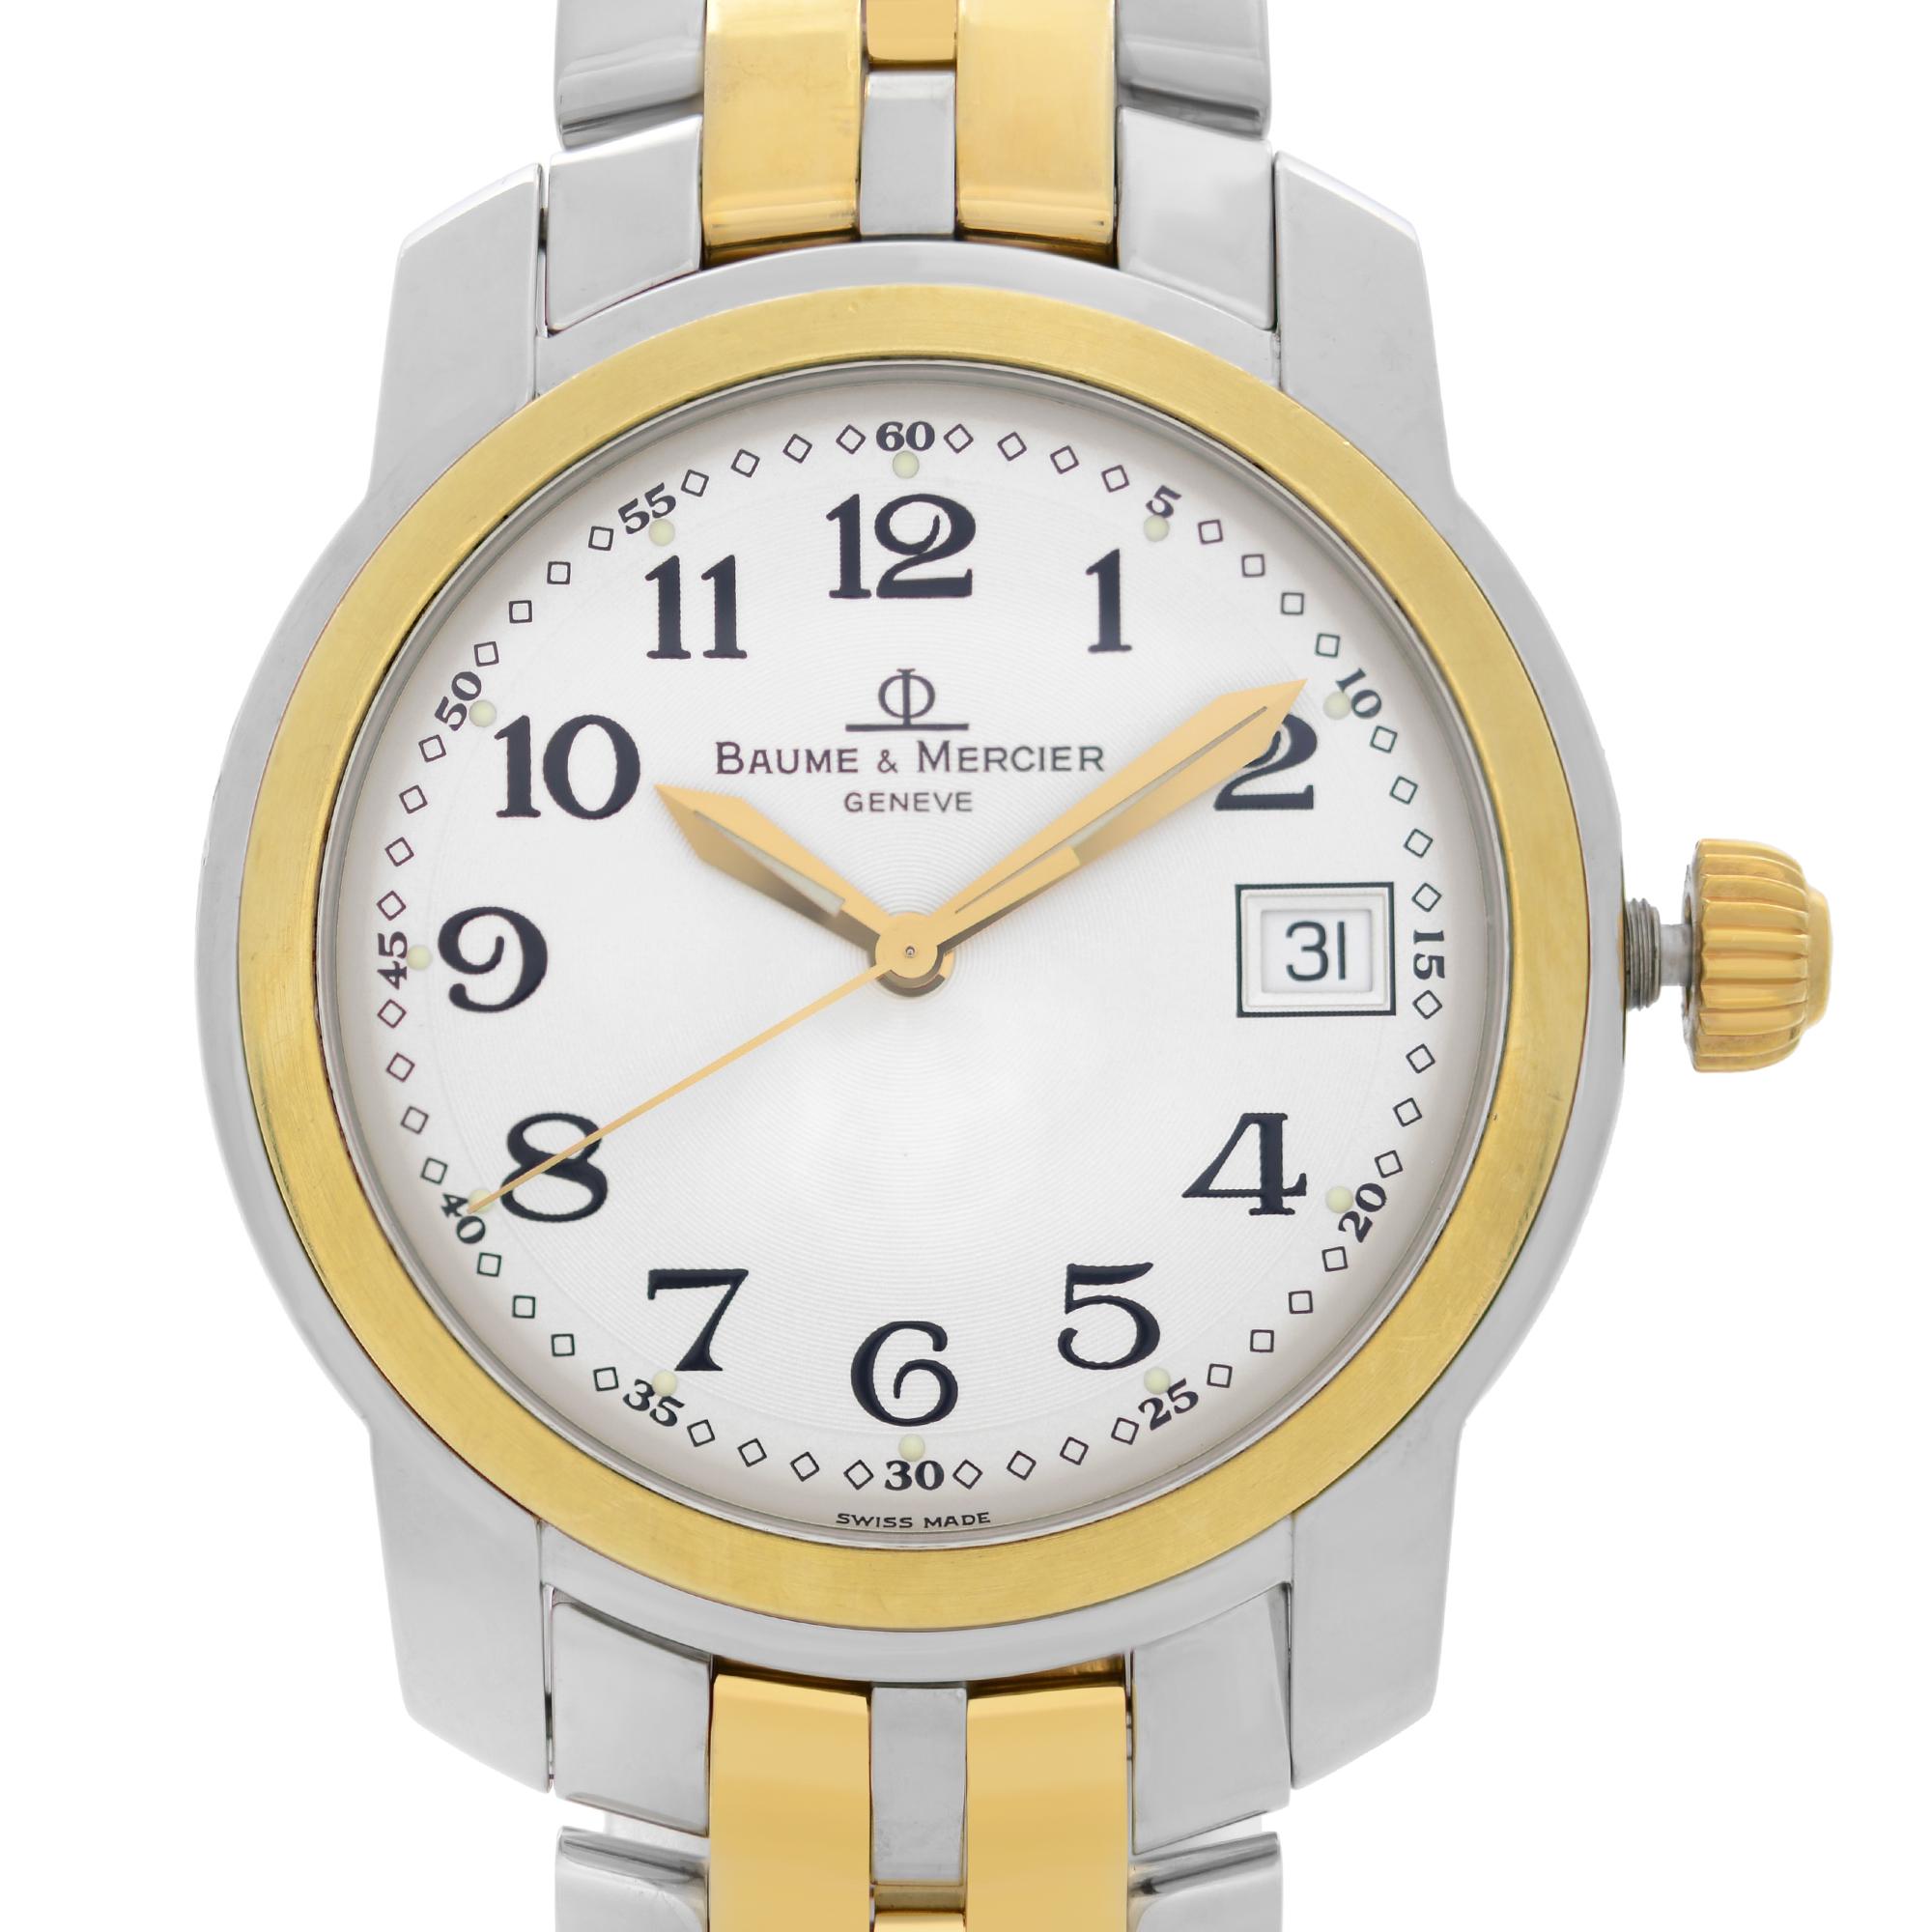 Pre-owned Baume & Mercier Stainless Steel & Solid 18k Yellow Gold,  White Dial Quartz Men's Watch.  No Original Box and Papers are Included. Chronostore Presentation Box and Authenticity Card are included. Covered by 1-year Chronostore